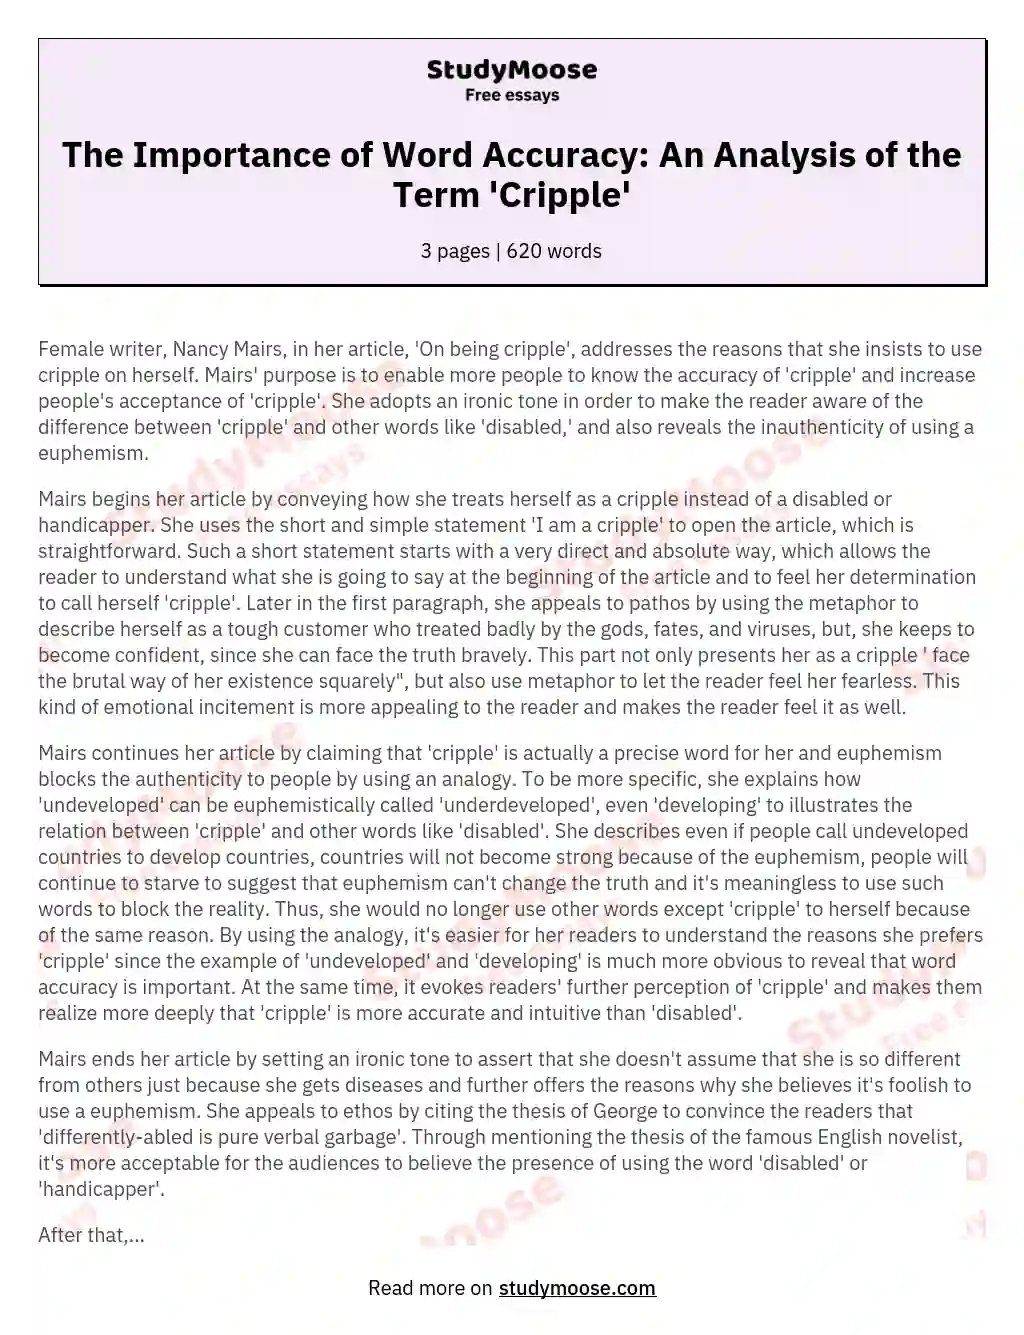 The Importance of Word Accuracy: An Analysis of the Term 'Cripple' essay